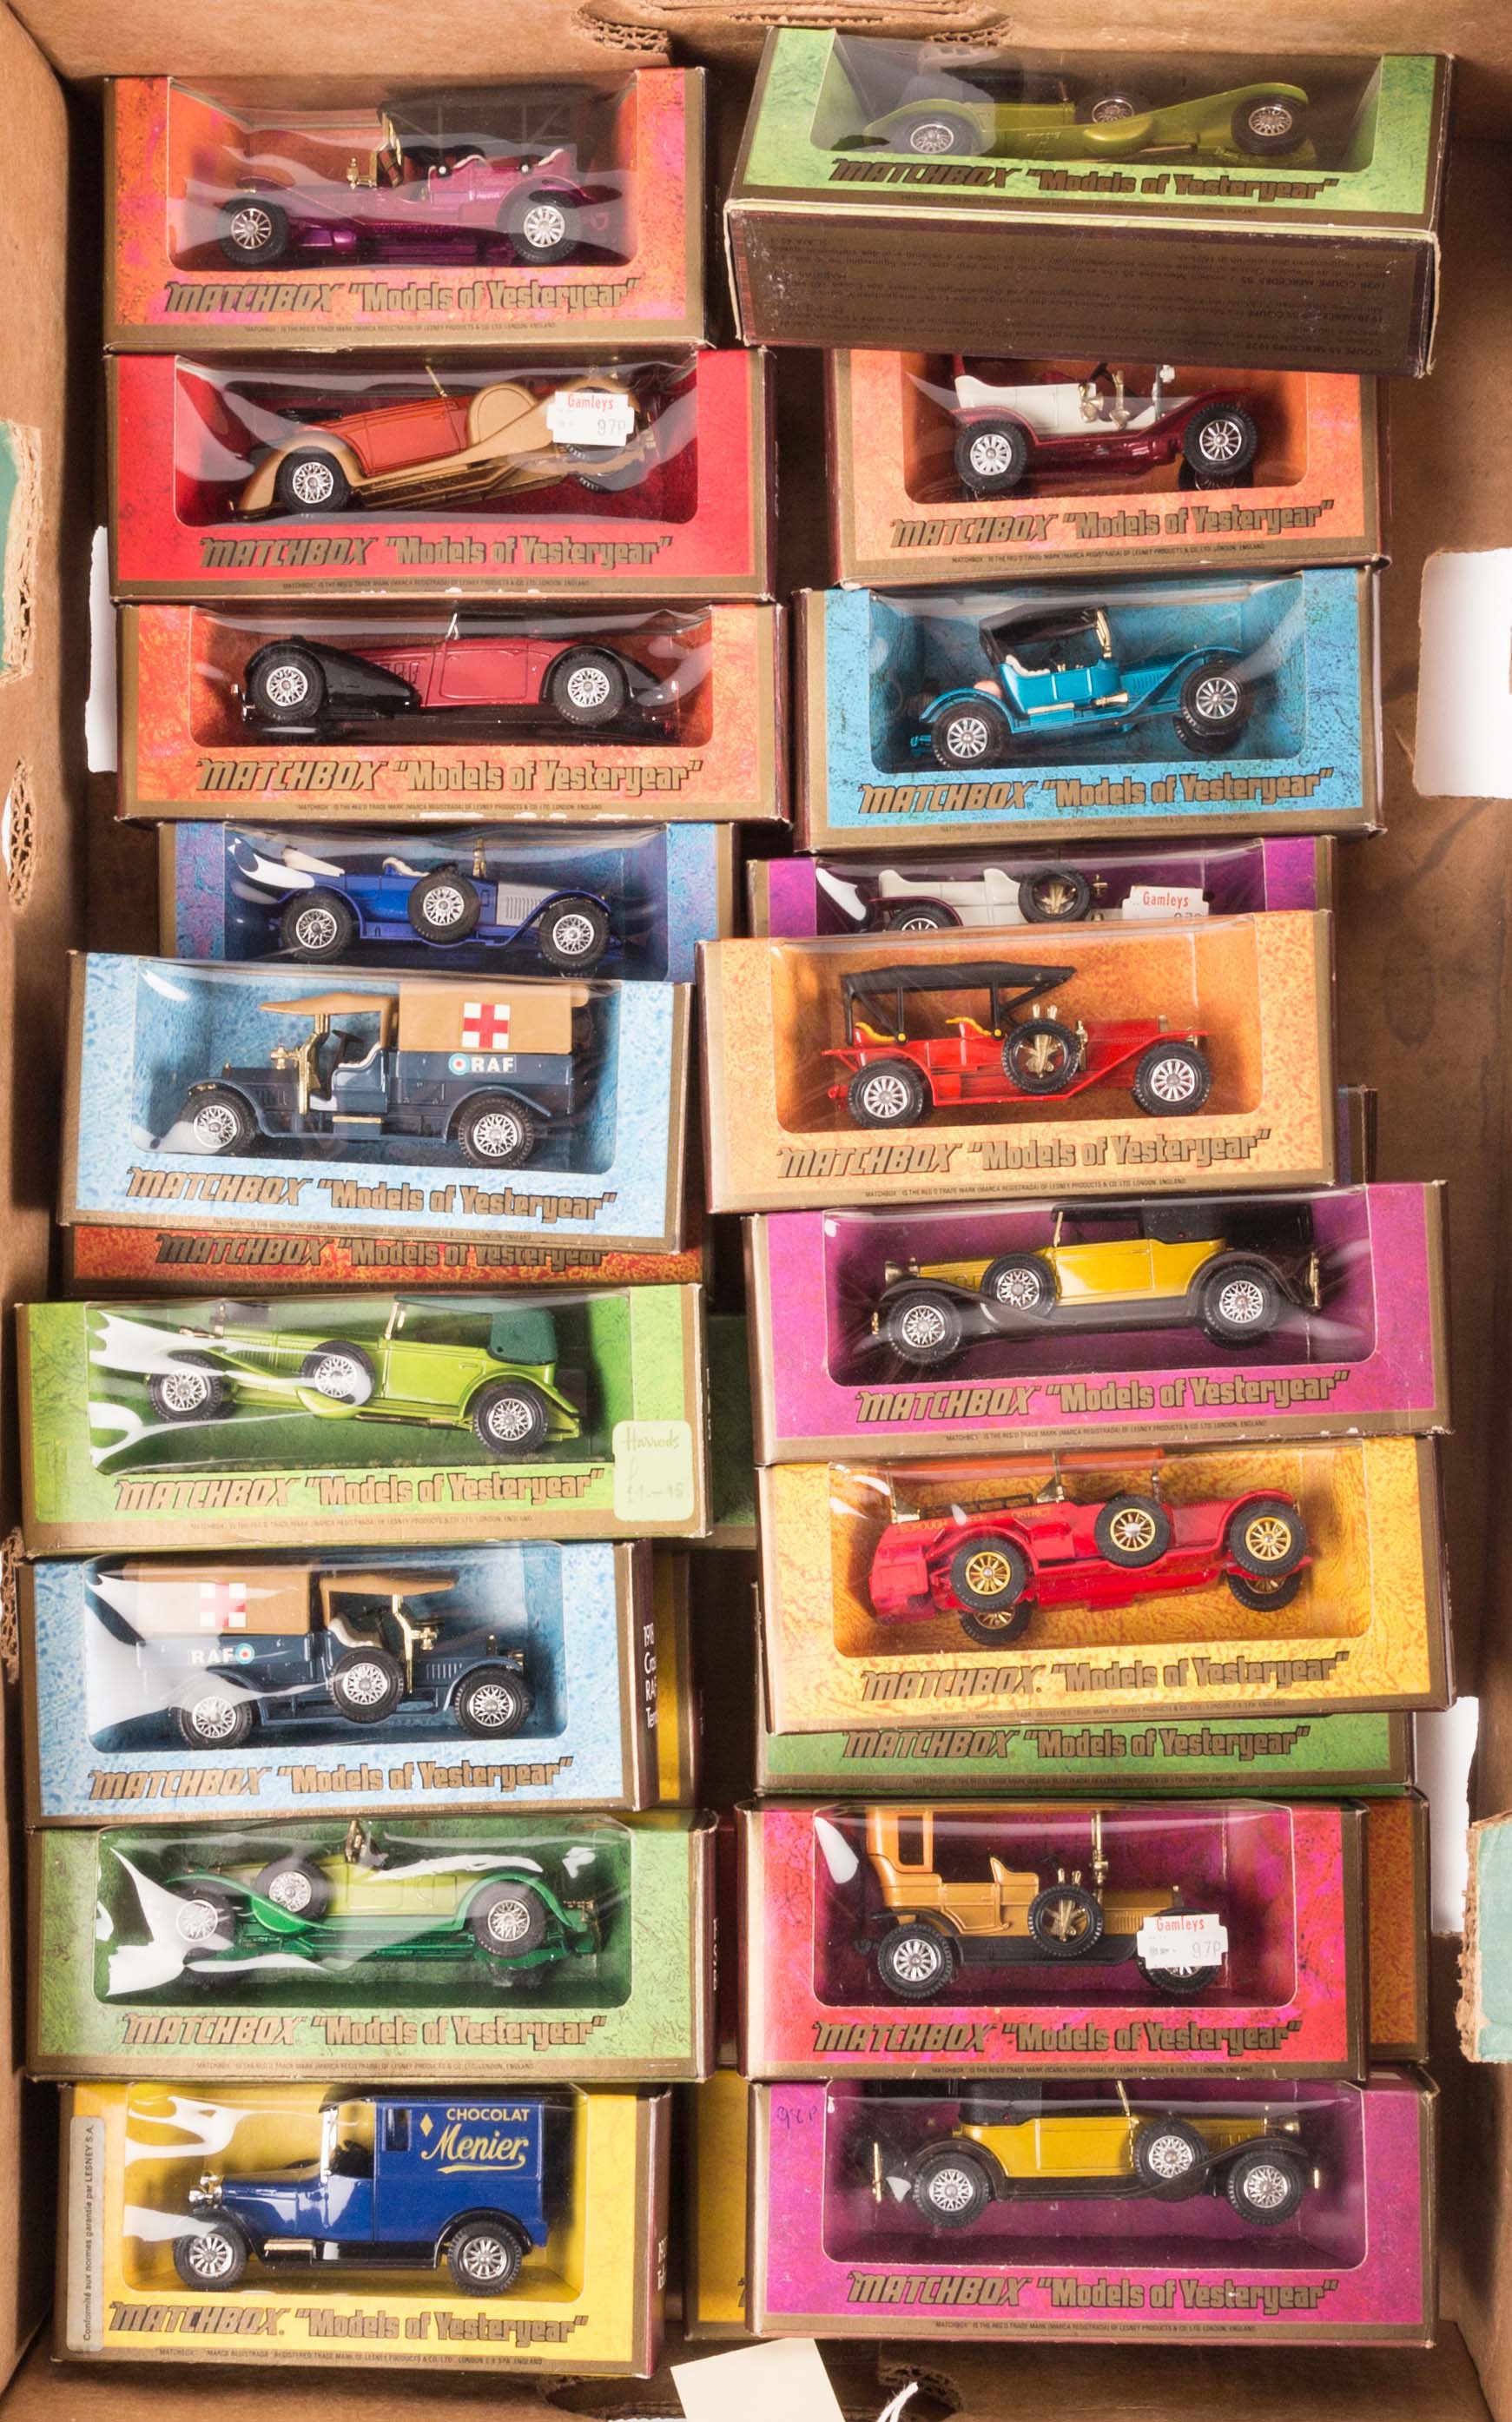 28 Matchbox Models of Yesteryear in wood grain boxes. Examples include; 1927 Talbot van, 1931